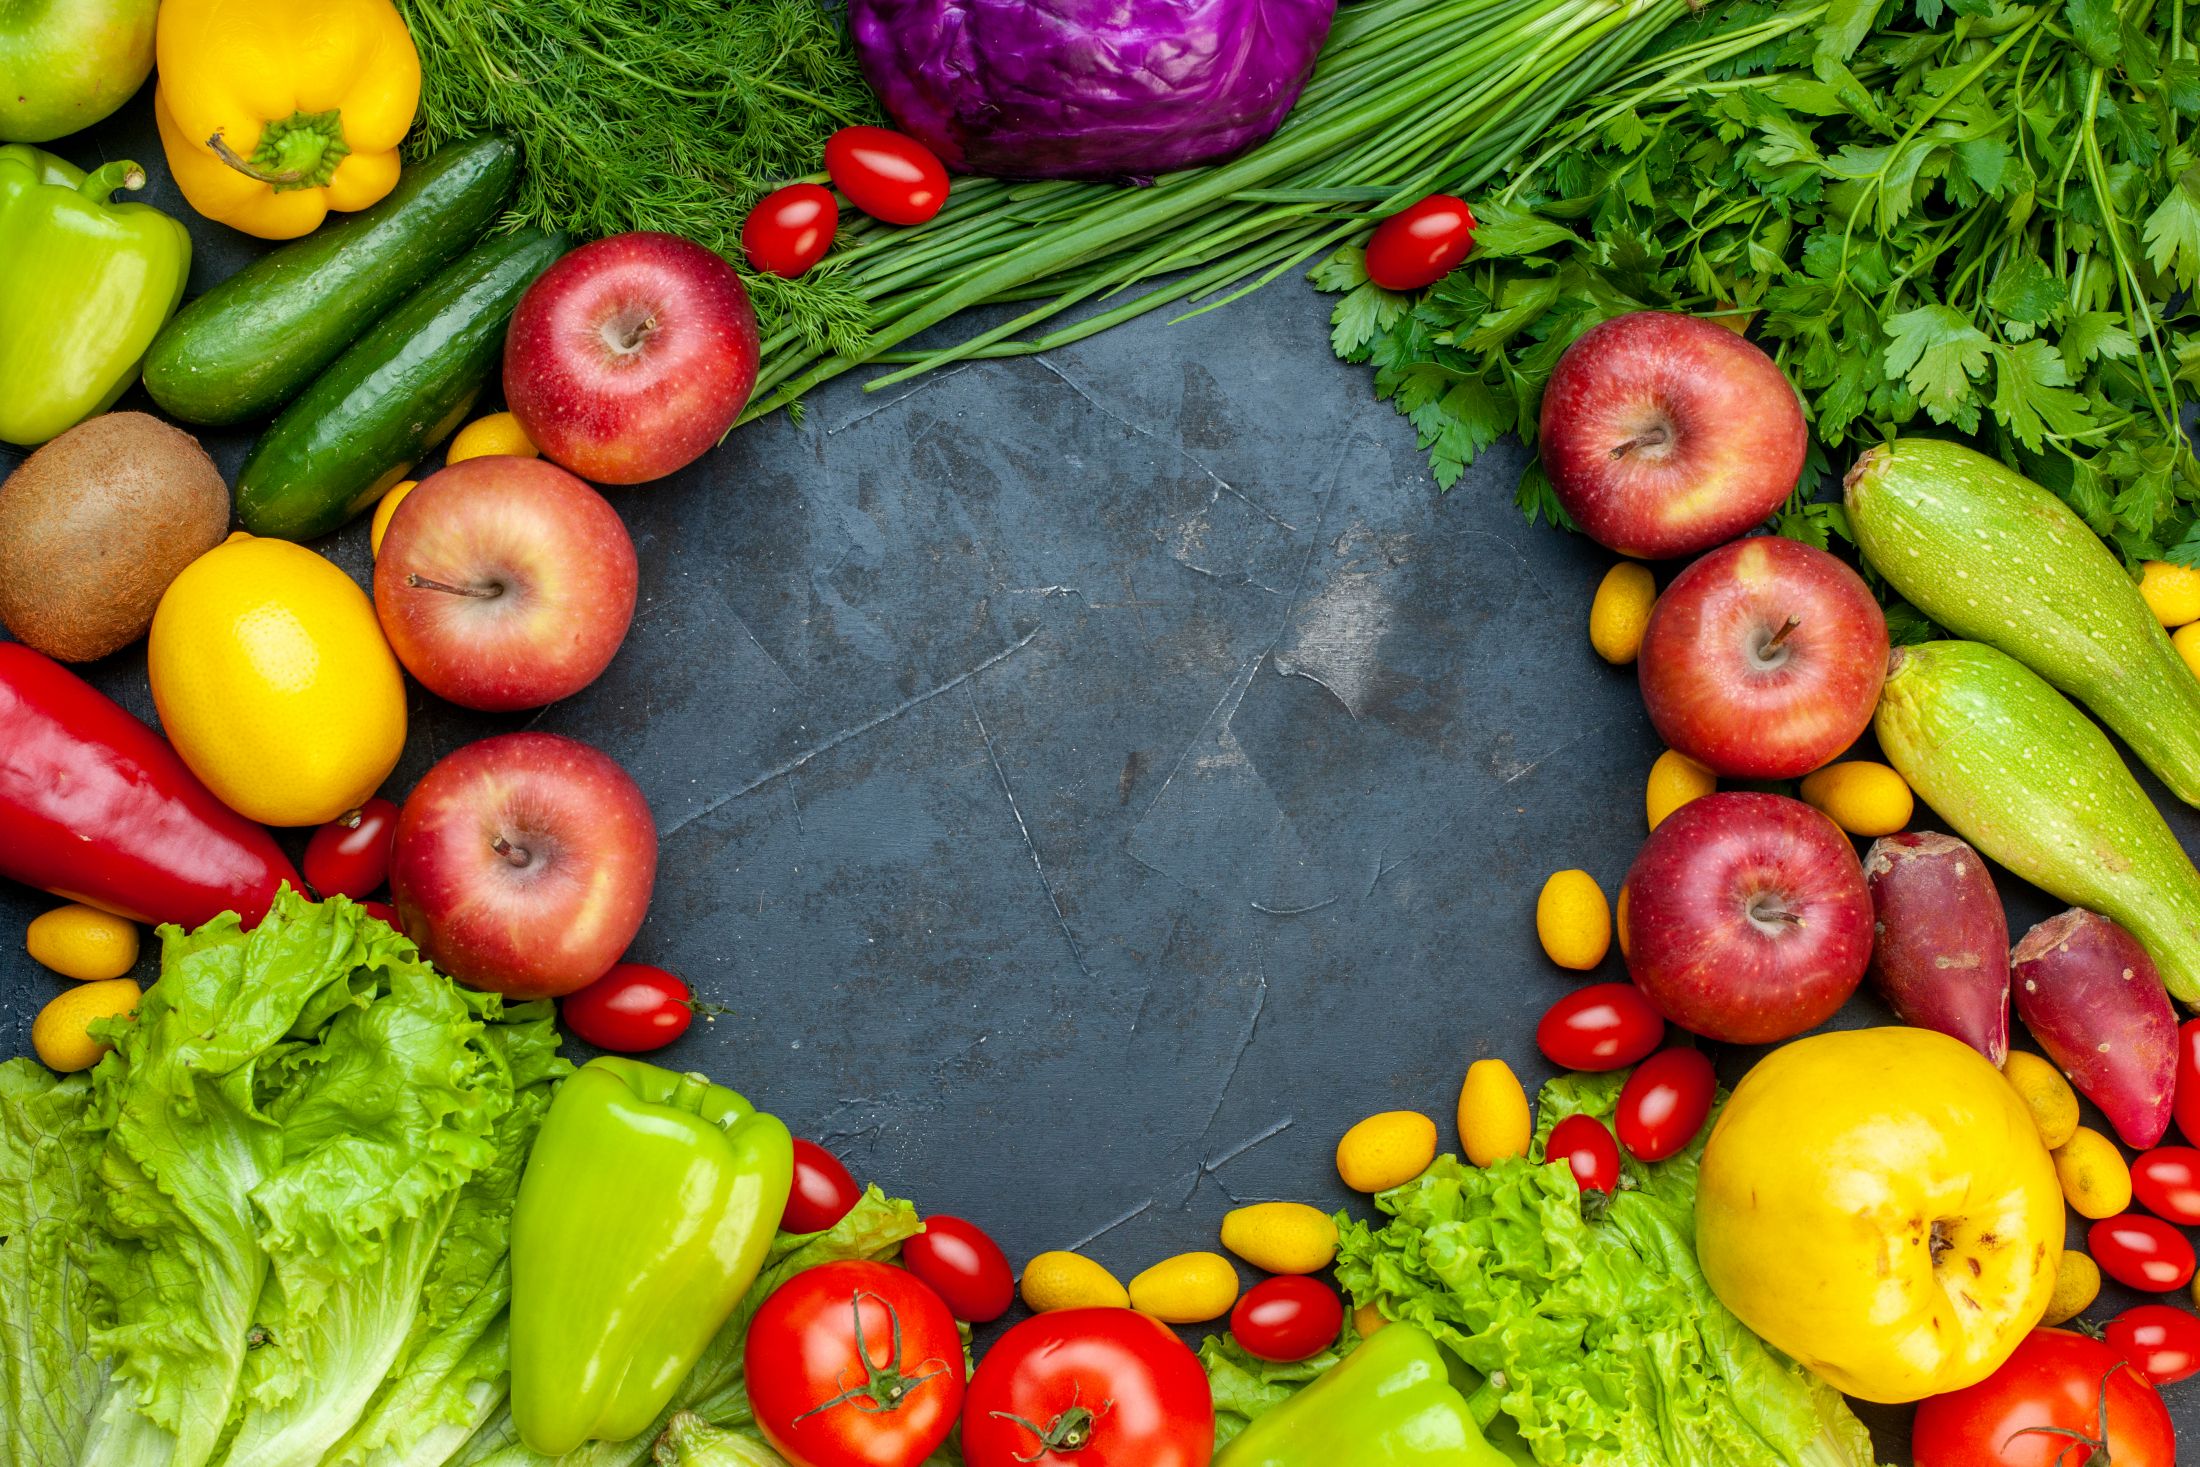 top-view-vegetables-and-fruits-lettuce-tomatoes-cucumber-dill-cherry-tomatoes-zucchini-green-onion-parsley-apple-lemon-kiwi-free-space-in-center.jpg